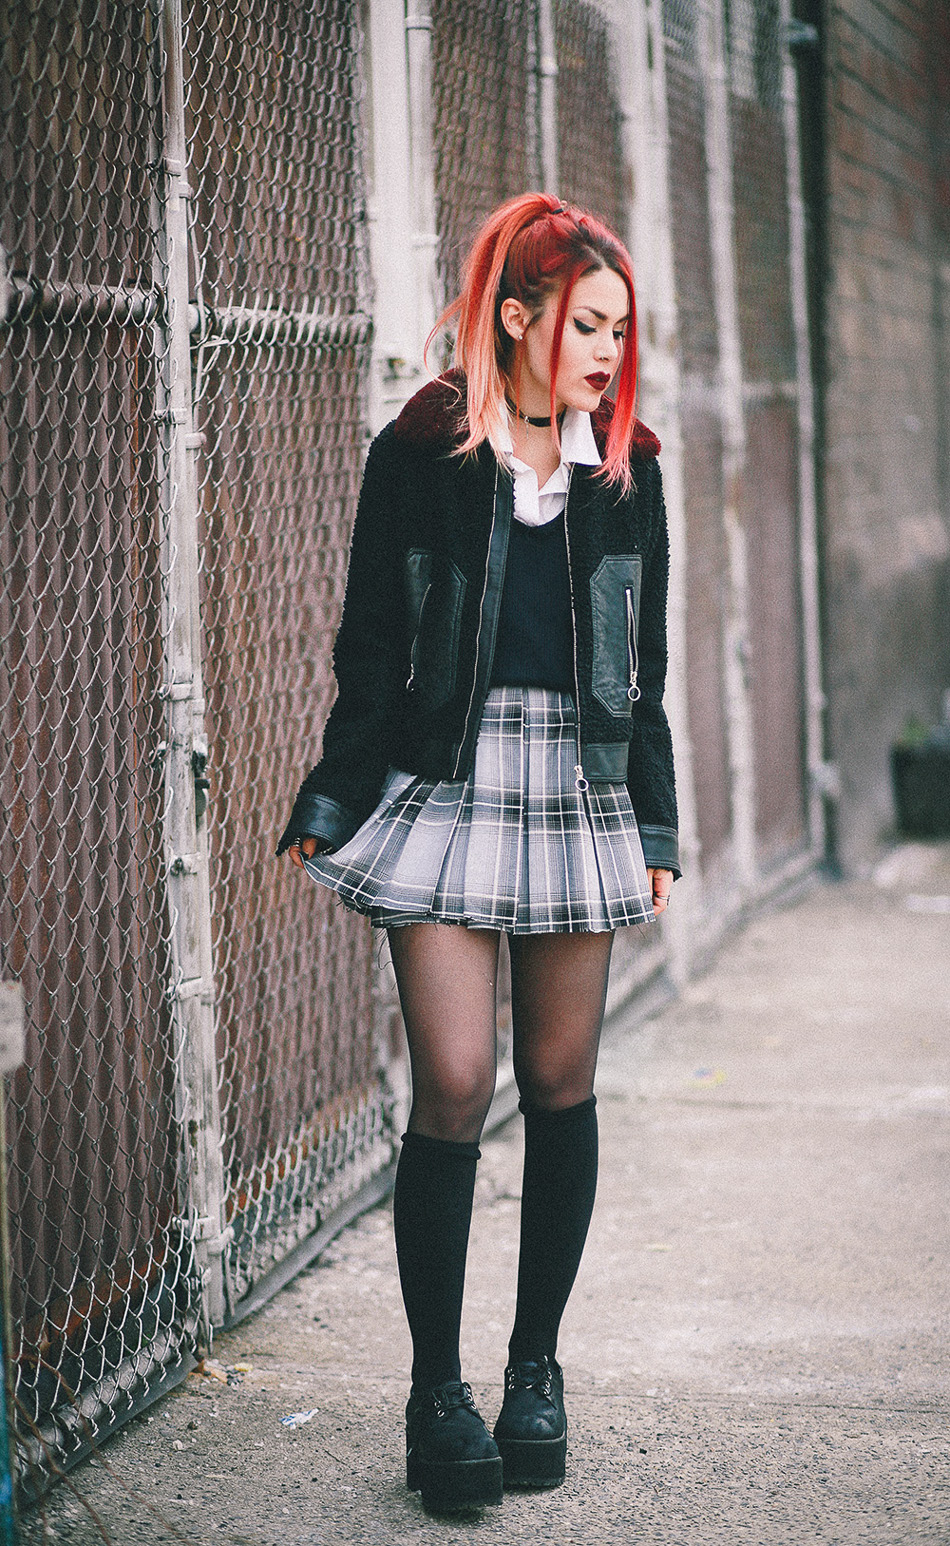 Le Happy wearing Sandro jacket and plaid skirt